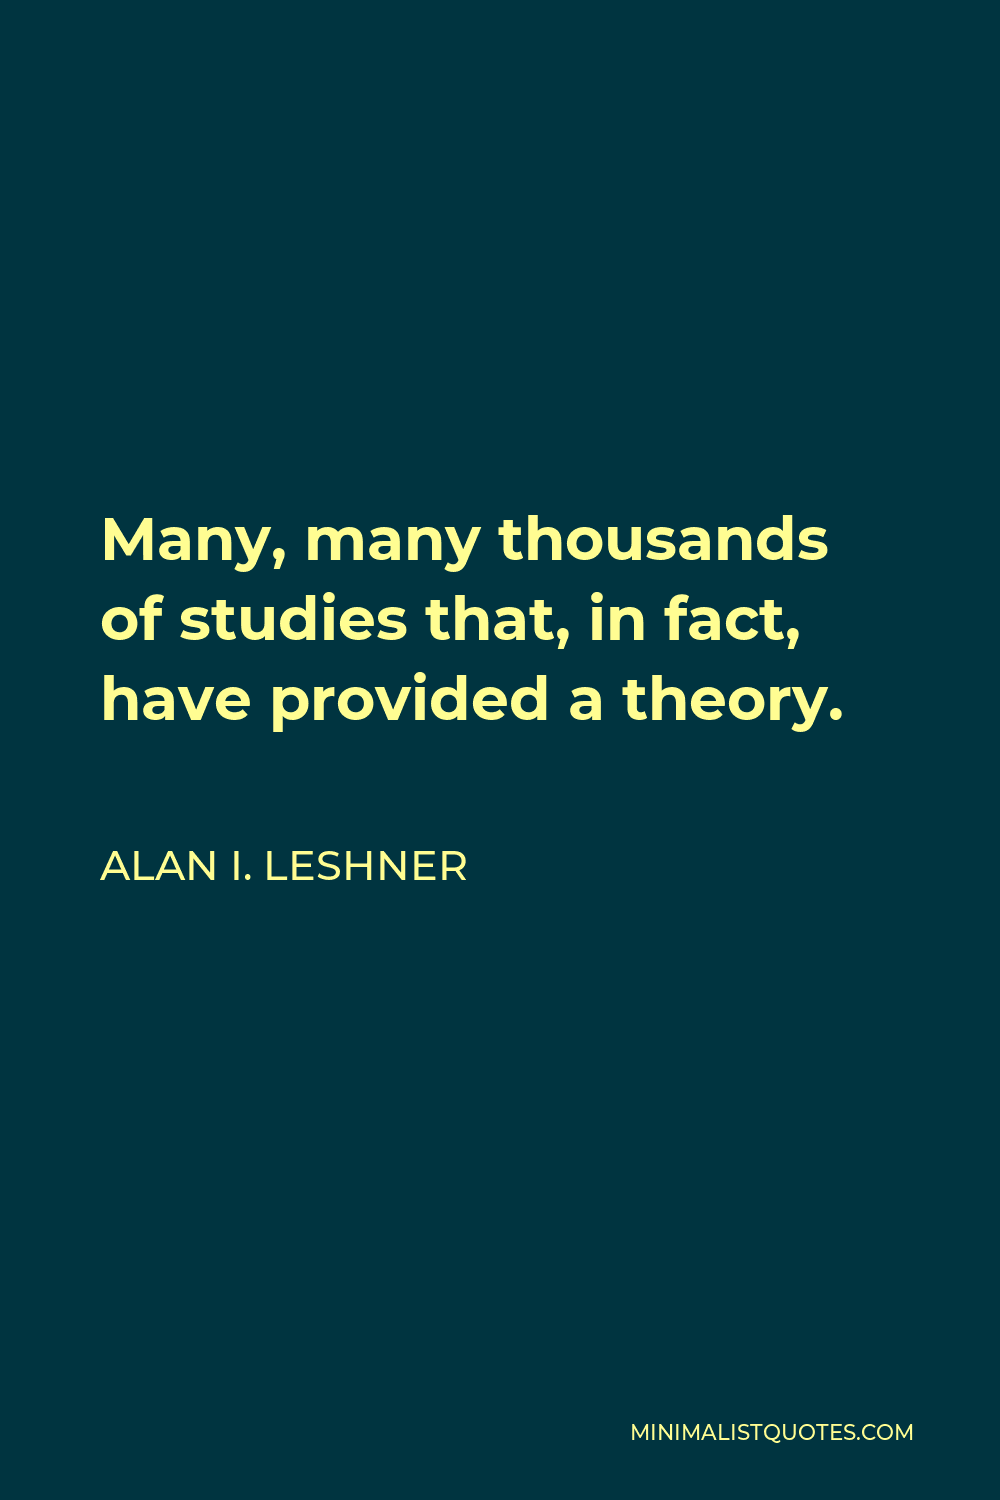 Alan I. Leshner Quote - Many, many thousands of studies that, in fact, have provided a theory.